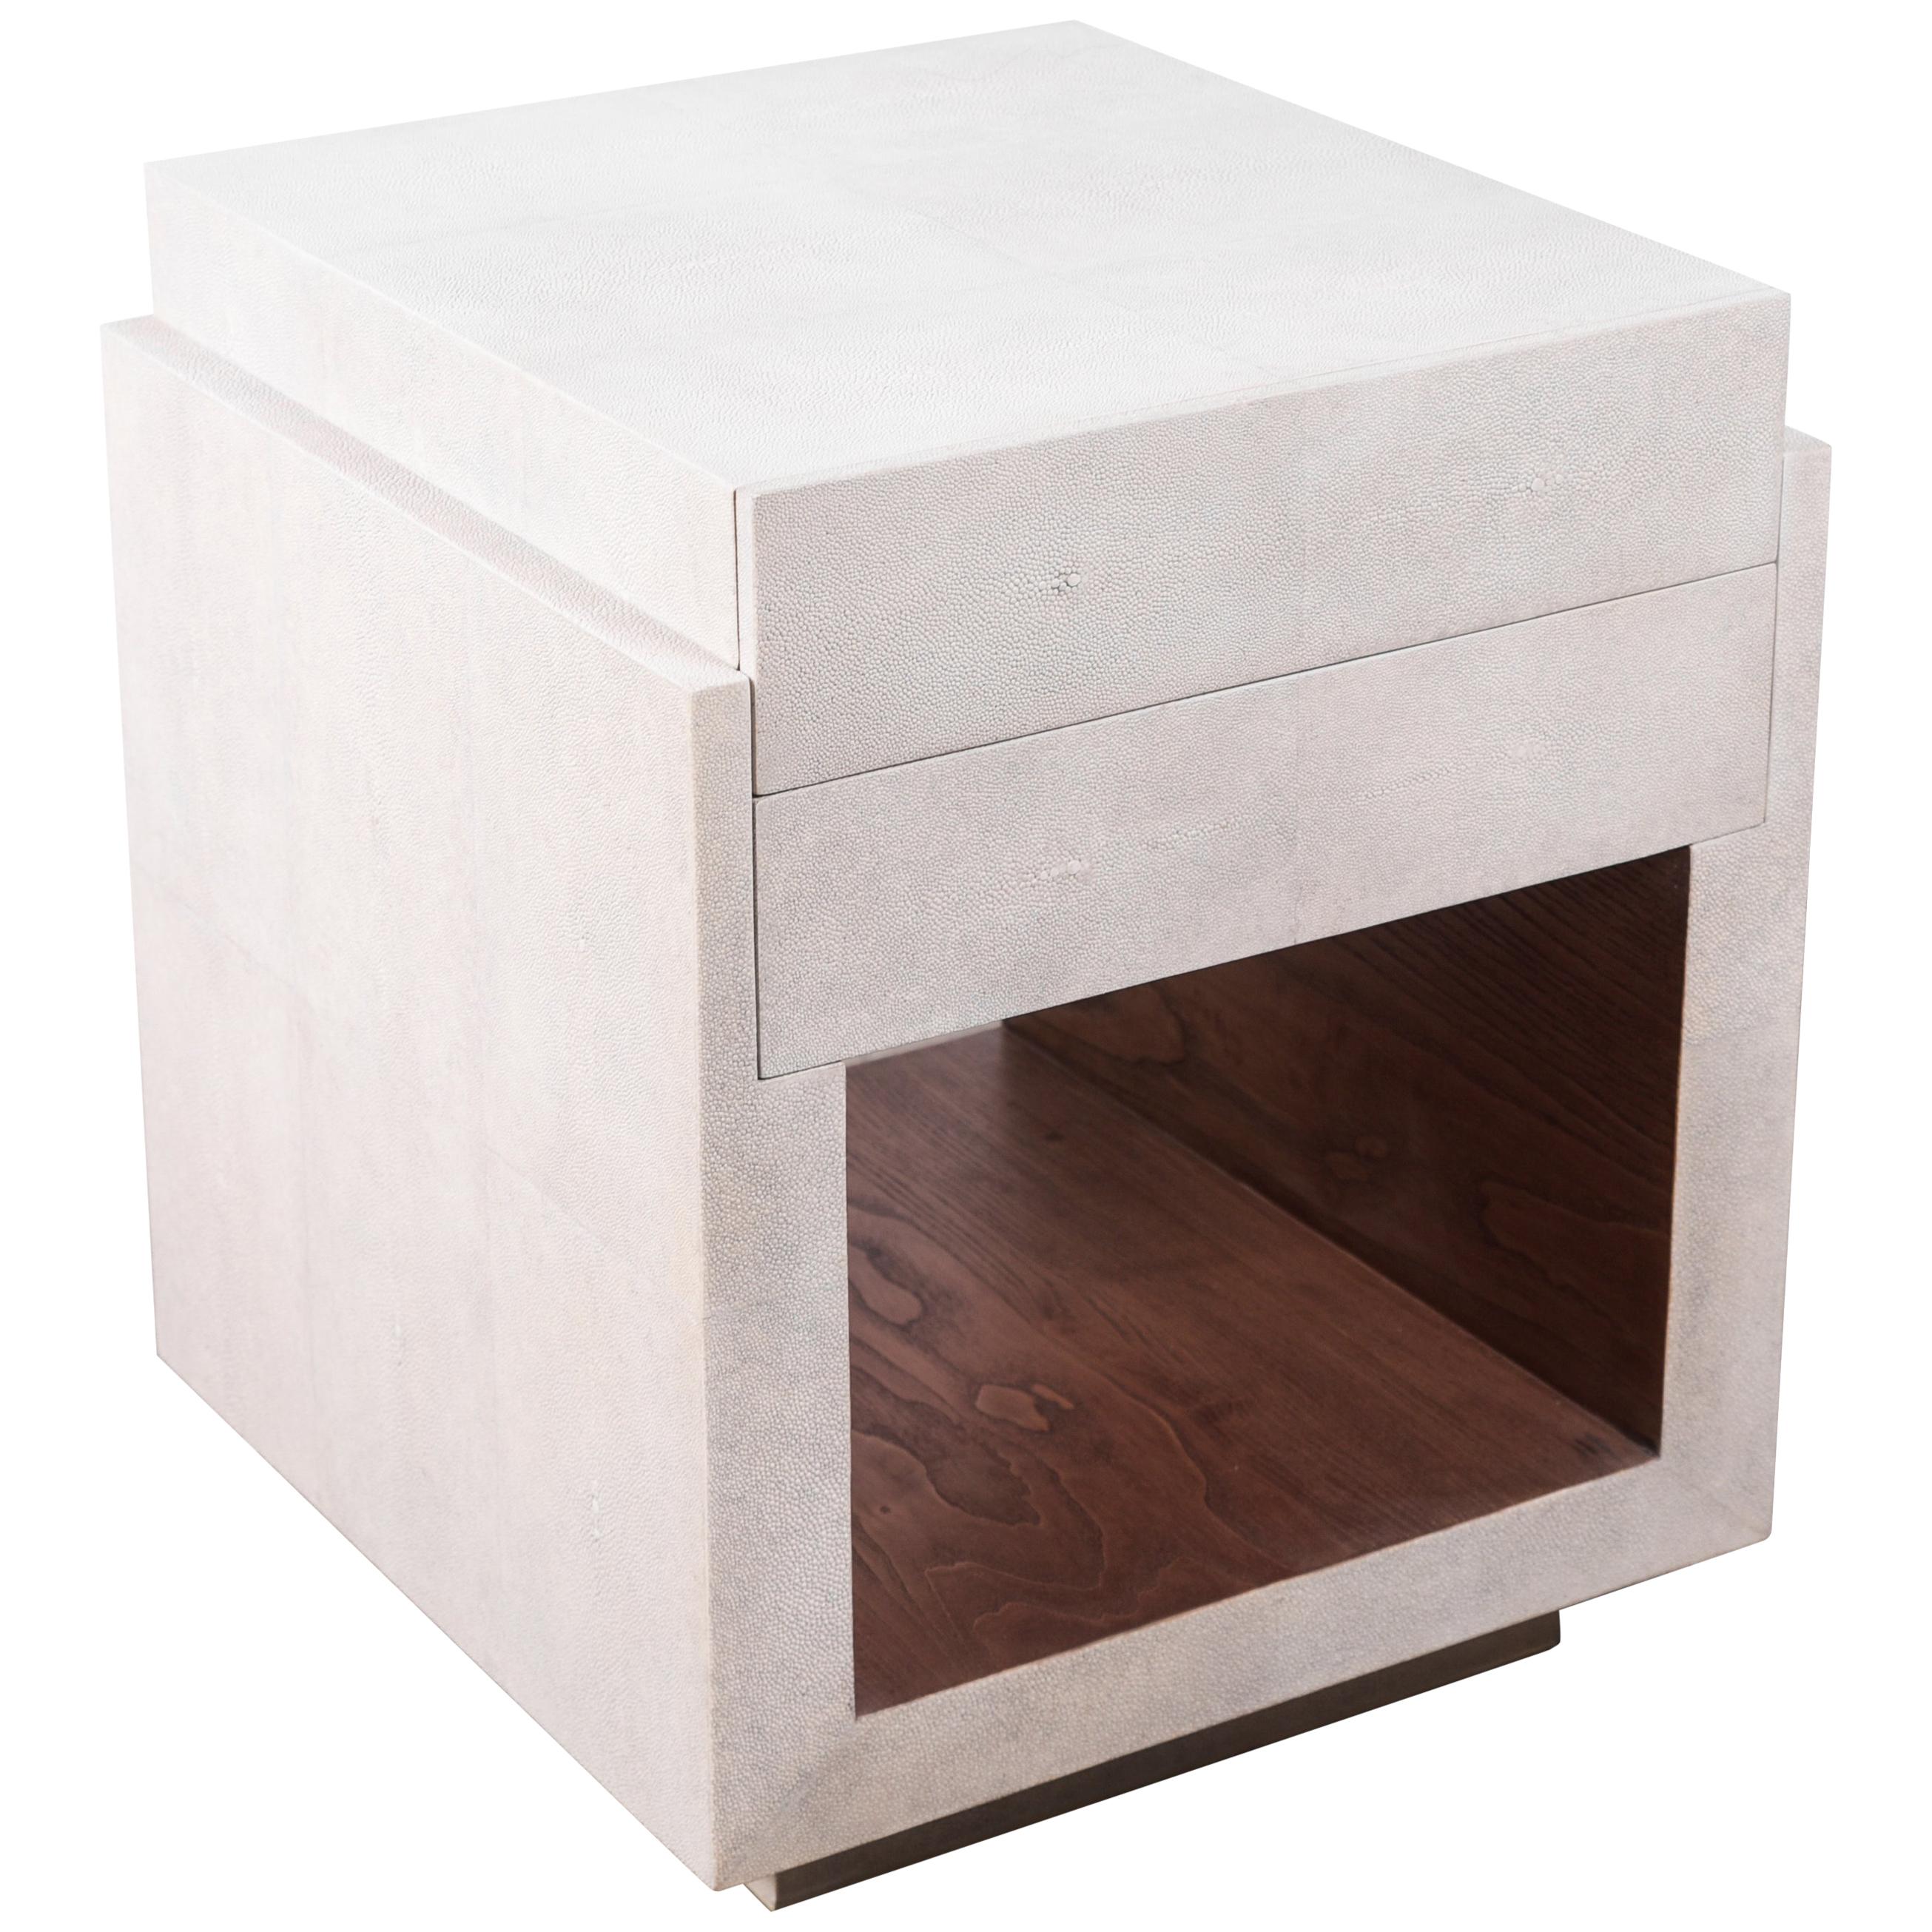 The tomboy bedside by R&Y Augousti is an elegant piece with its subtle geometry. This bedside table is completely inlaid in a mixture of cream shagreen and gemelina wood veneer in the shelf opening. This bedside table includes two drawers and a